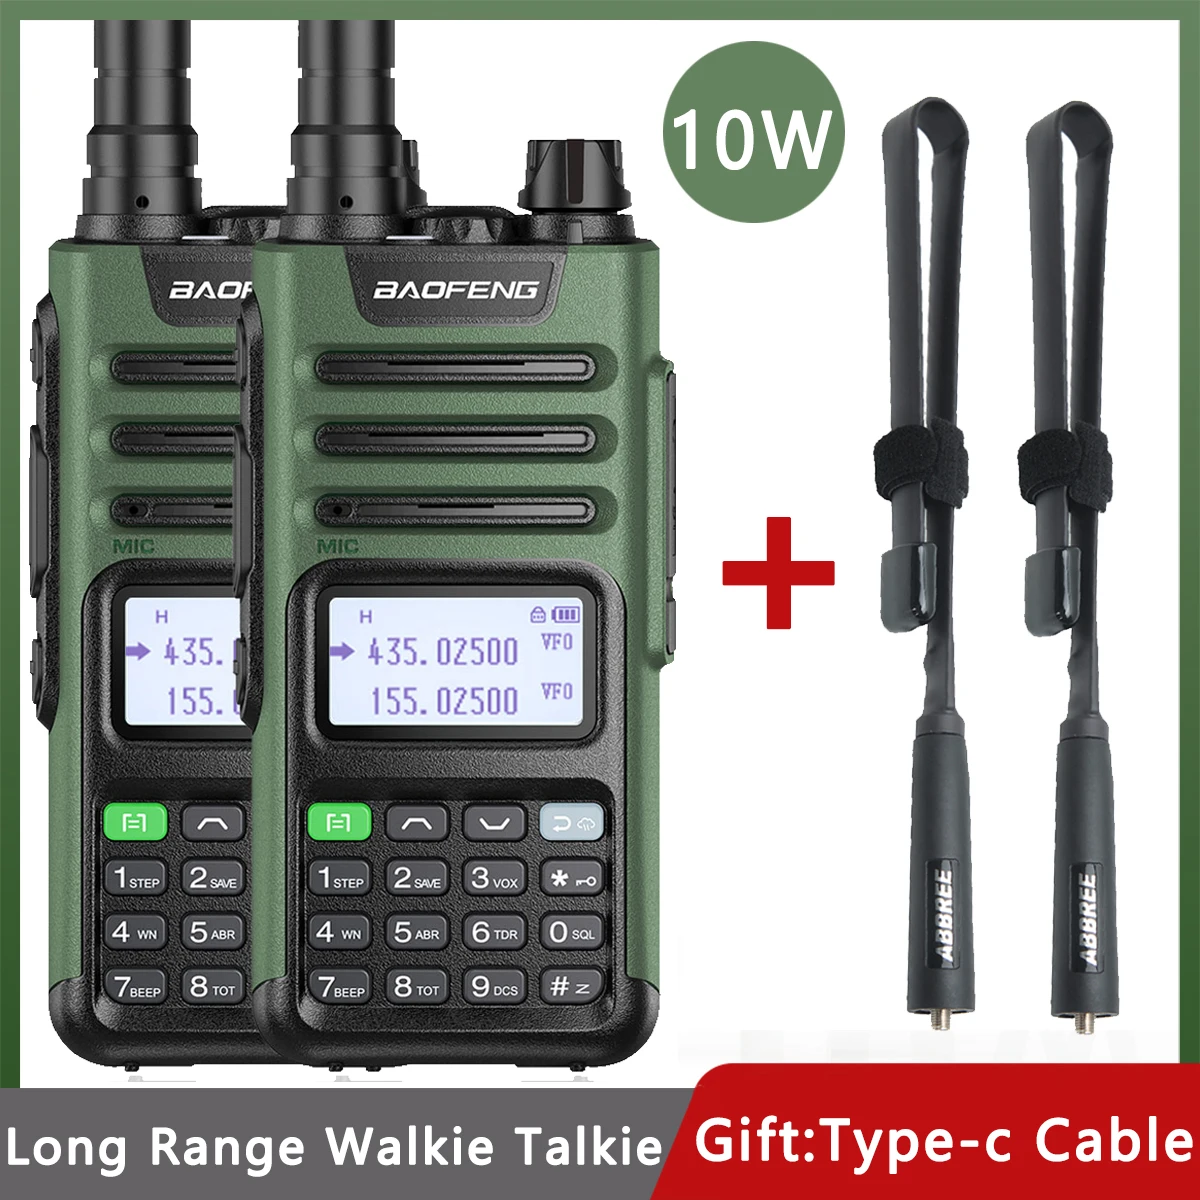 2pcs Baofeng Uv13 Pro 10w Dual Band Walkie Talkie 10km Uv-13pro With Typ-c  Cable Uv-5r Uv10r Two Way Radio With Tactical Antenna Walkie Talkie  AliExpress